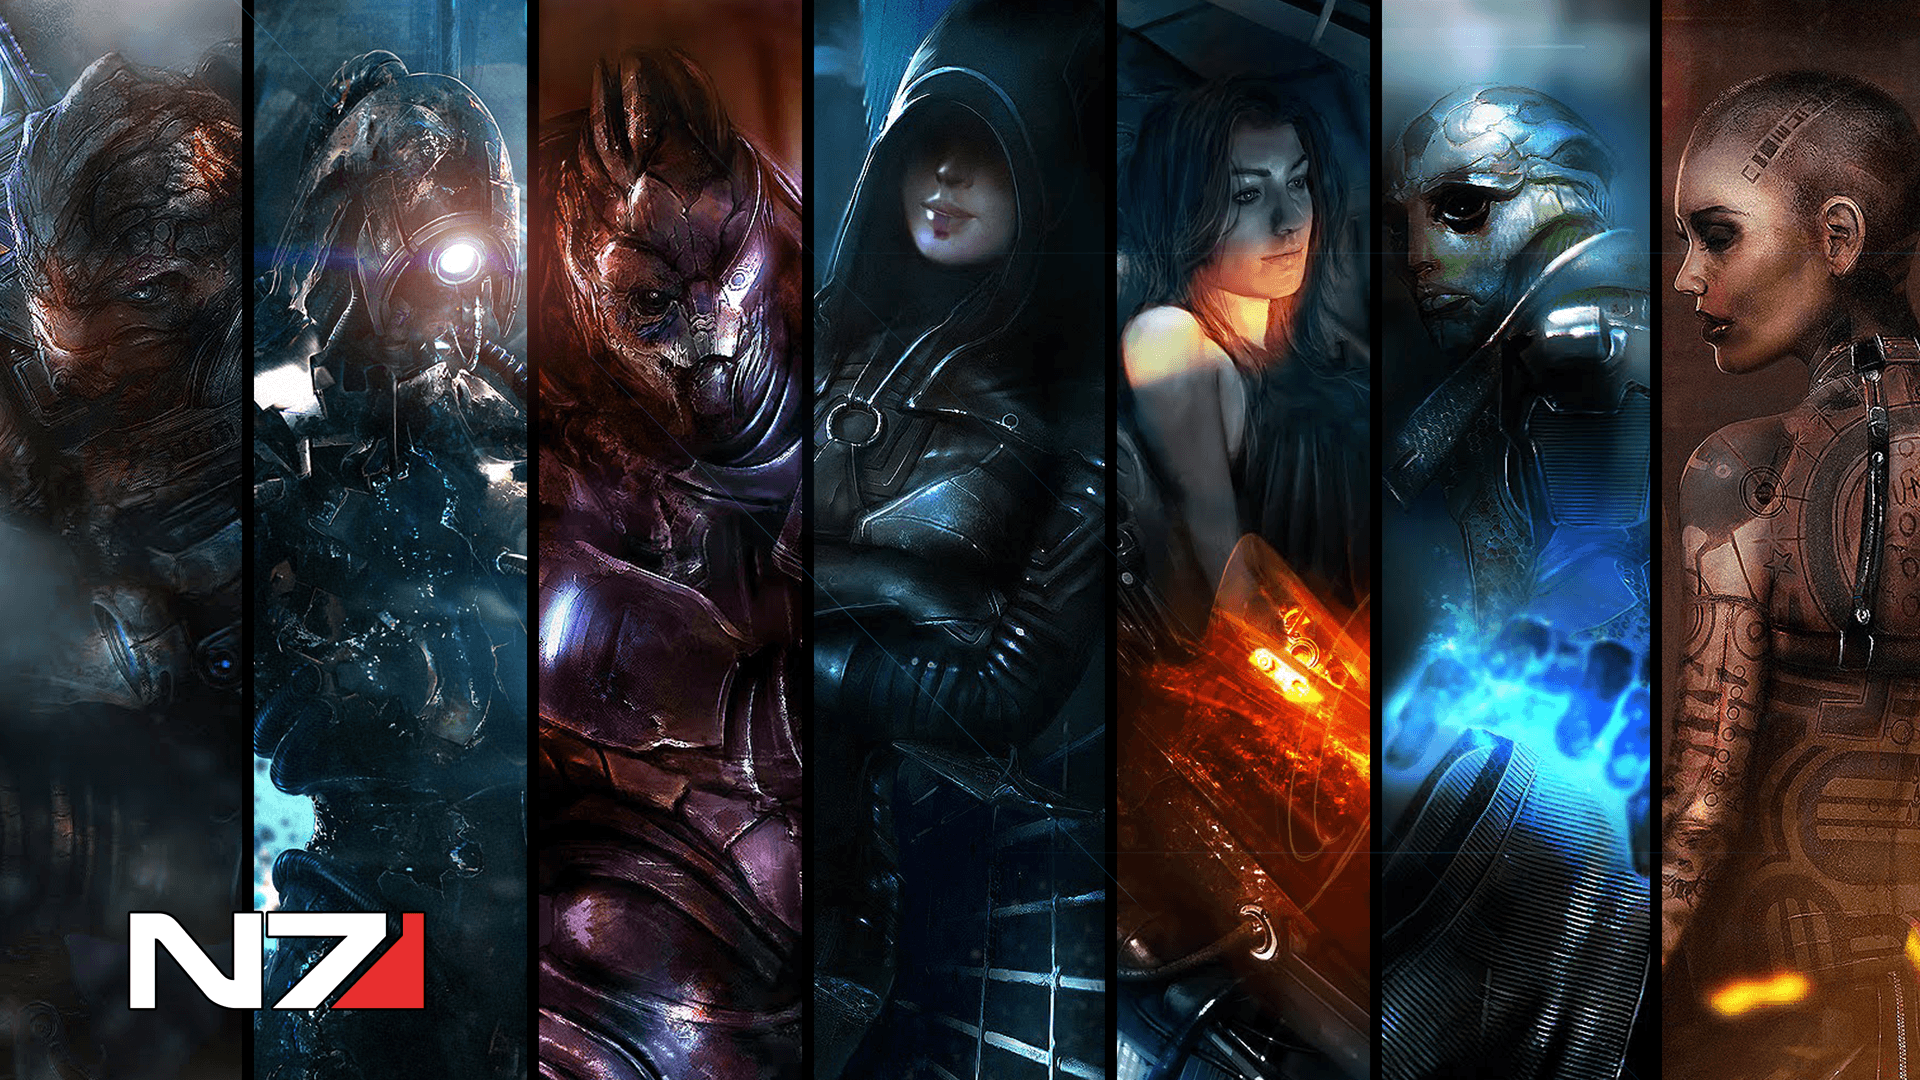 video game collage wallpaper